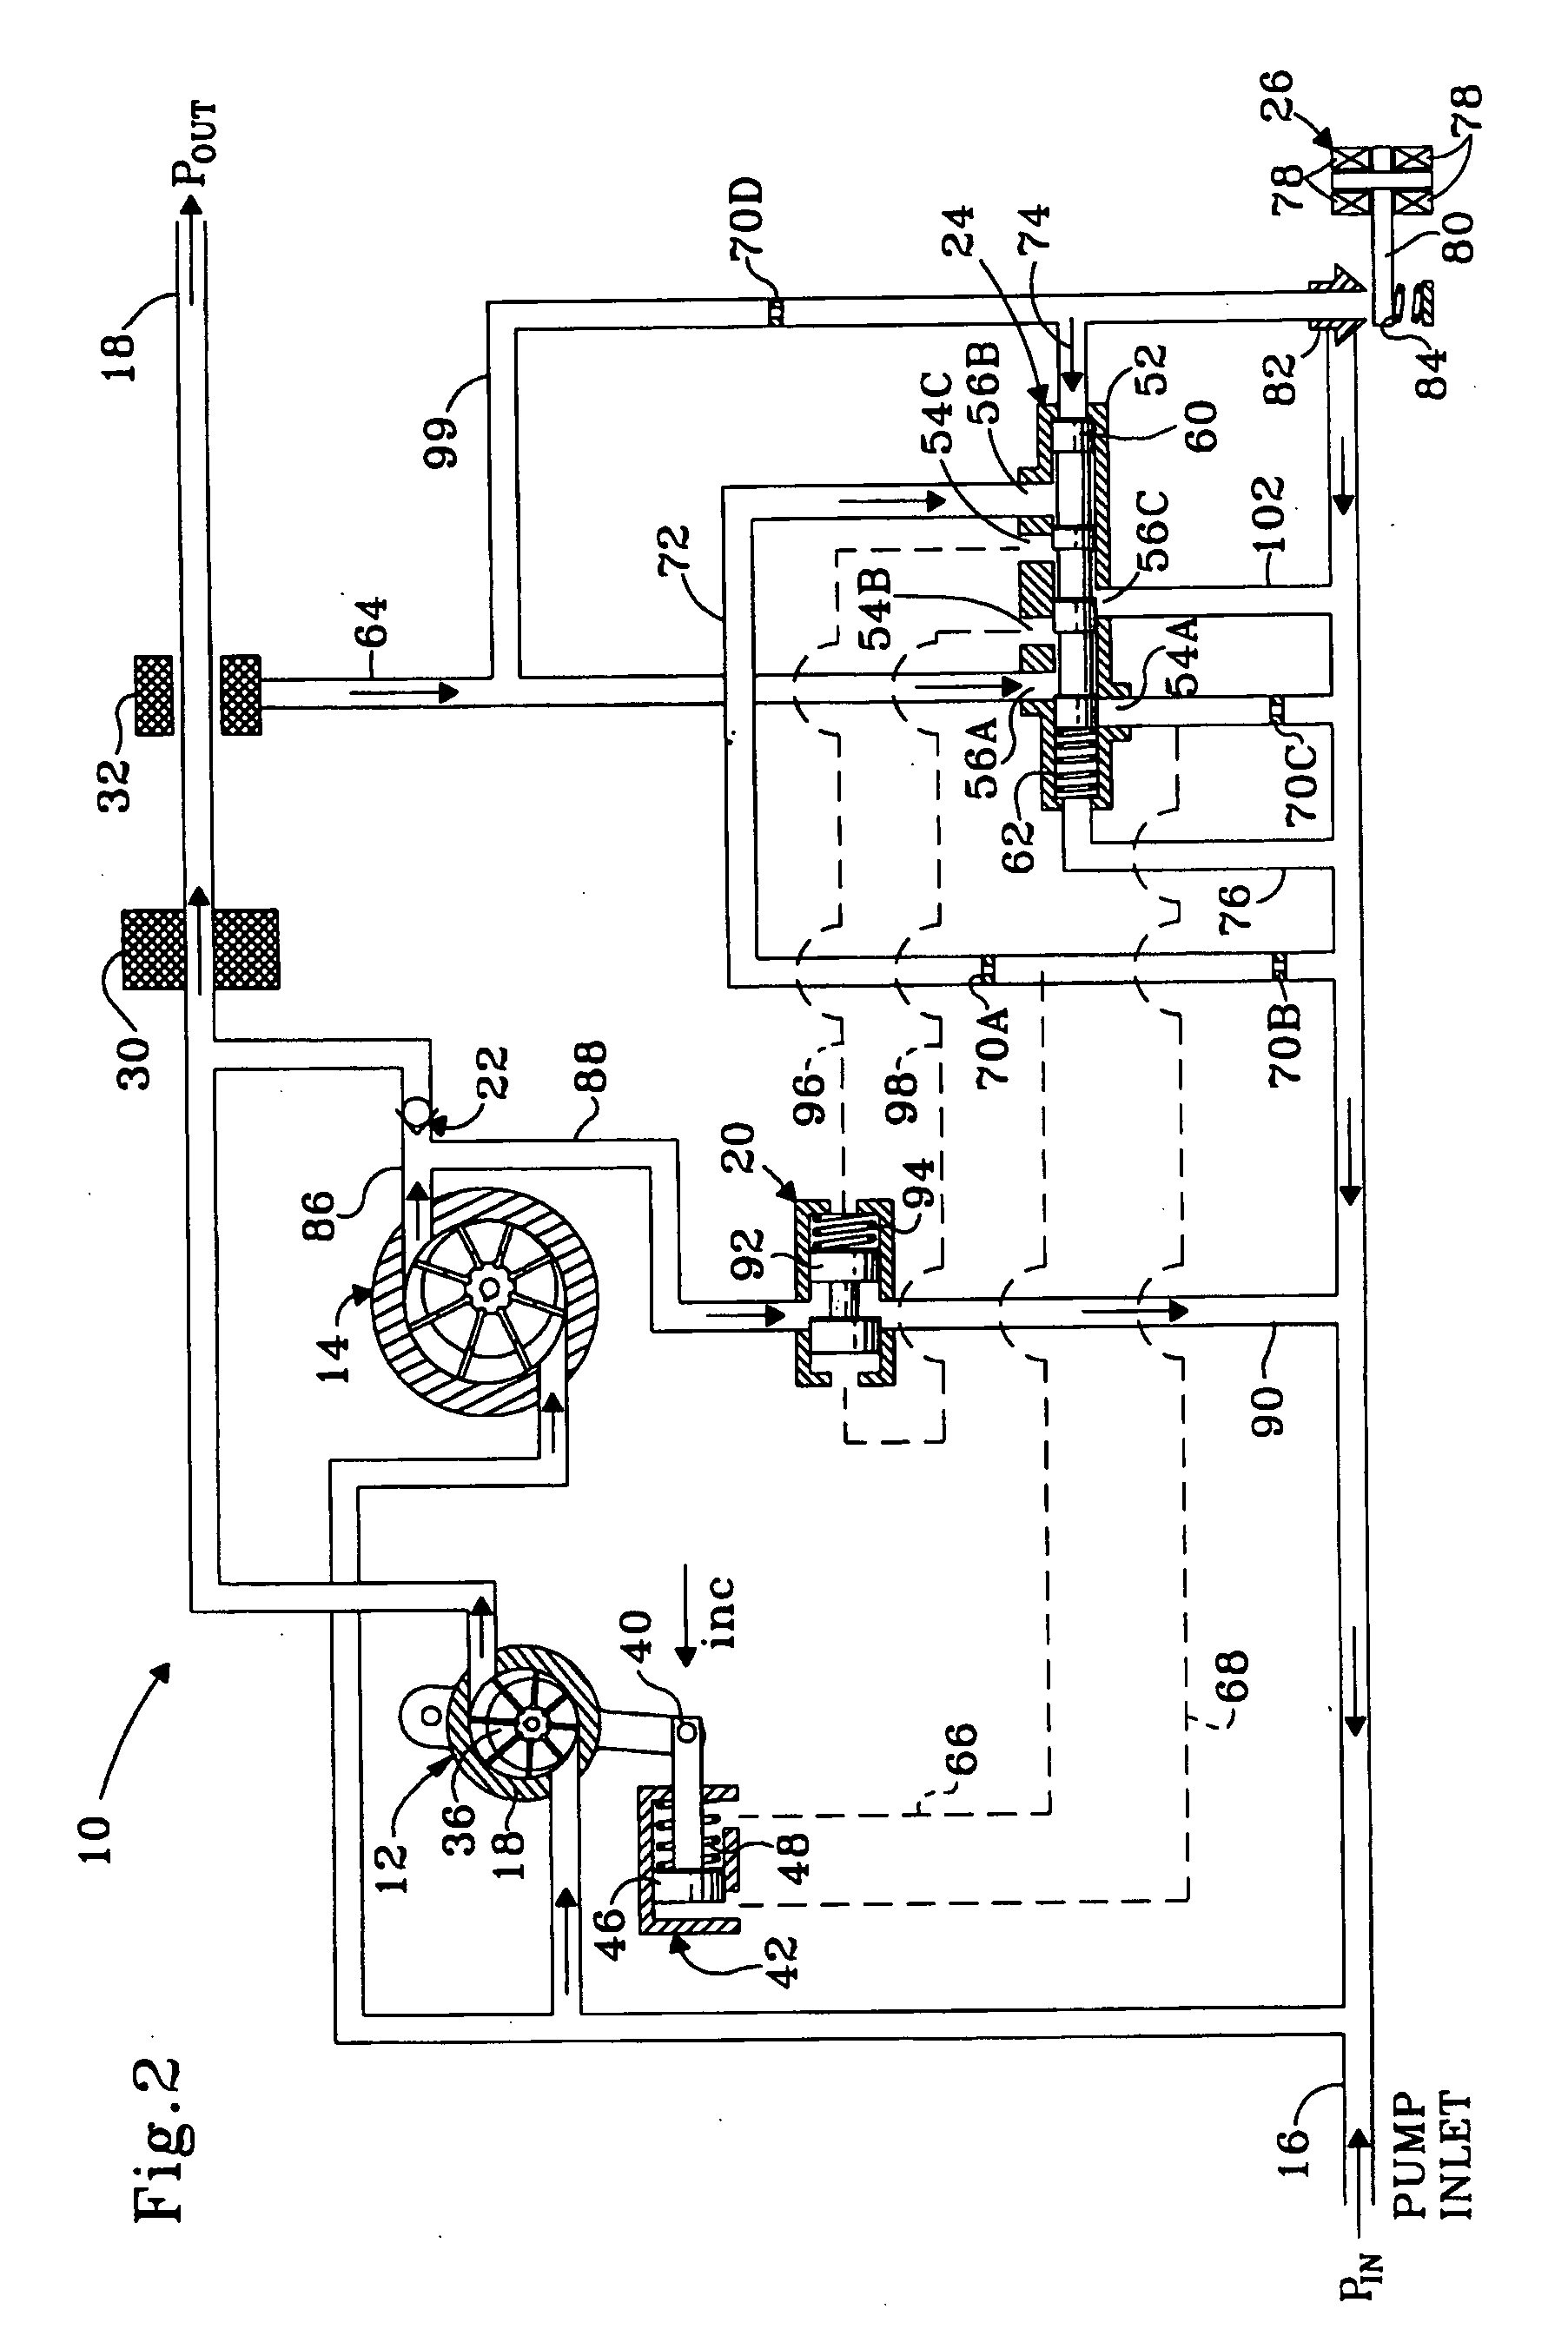 High Efficiency 2-Stage Fuel Pump and Control Scheme for Gas Turbines